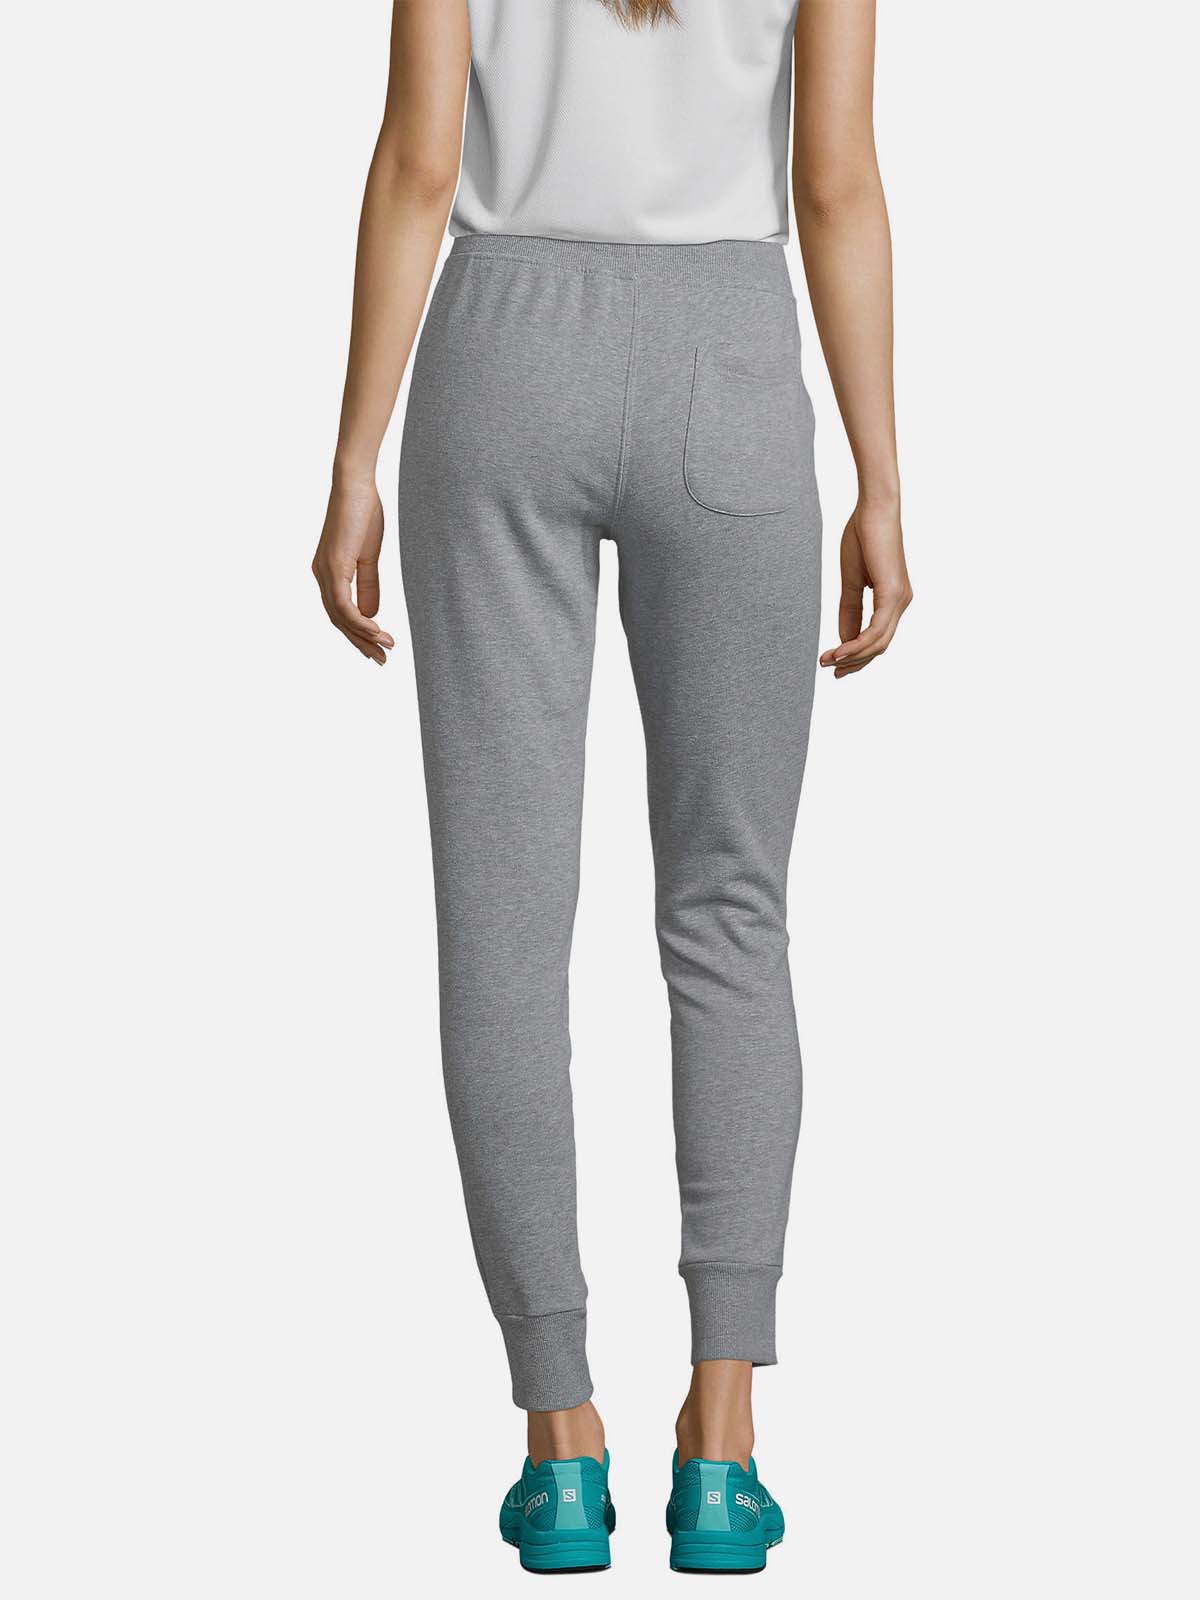 Iconic Women'S Trousers - Grey